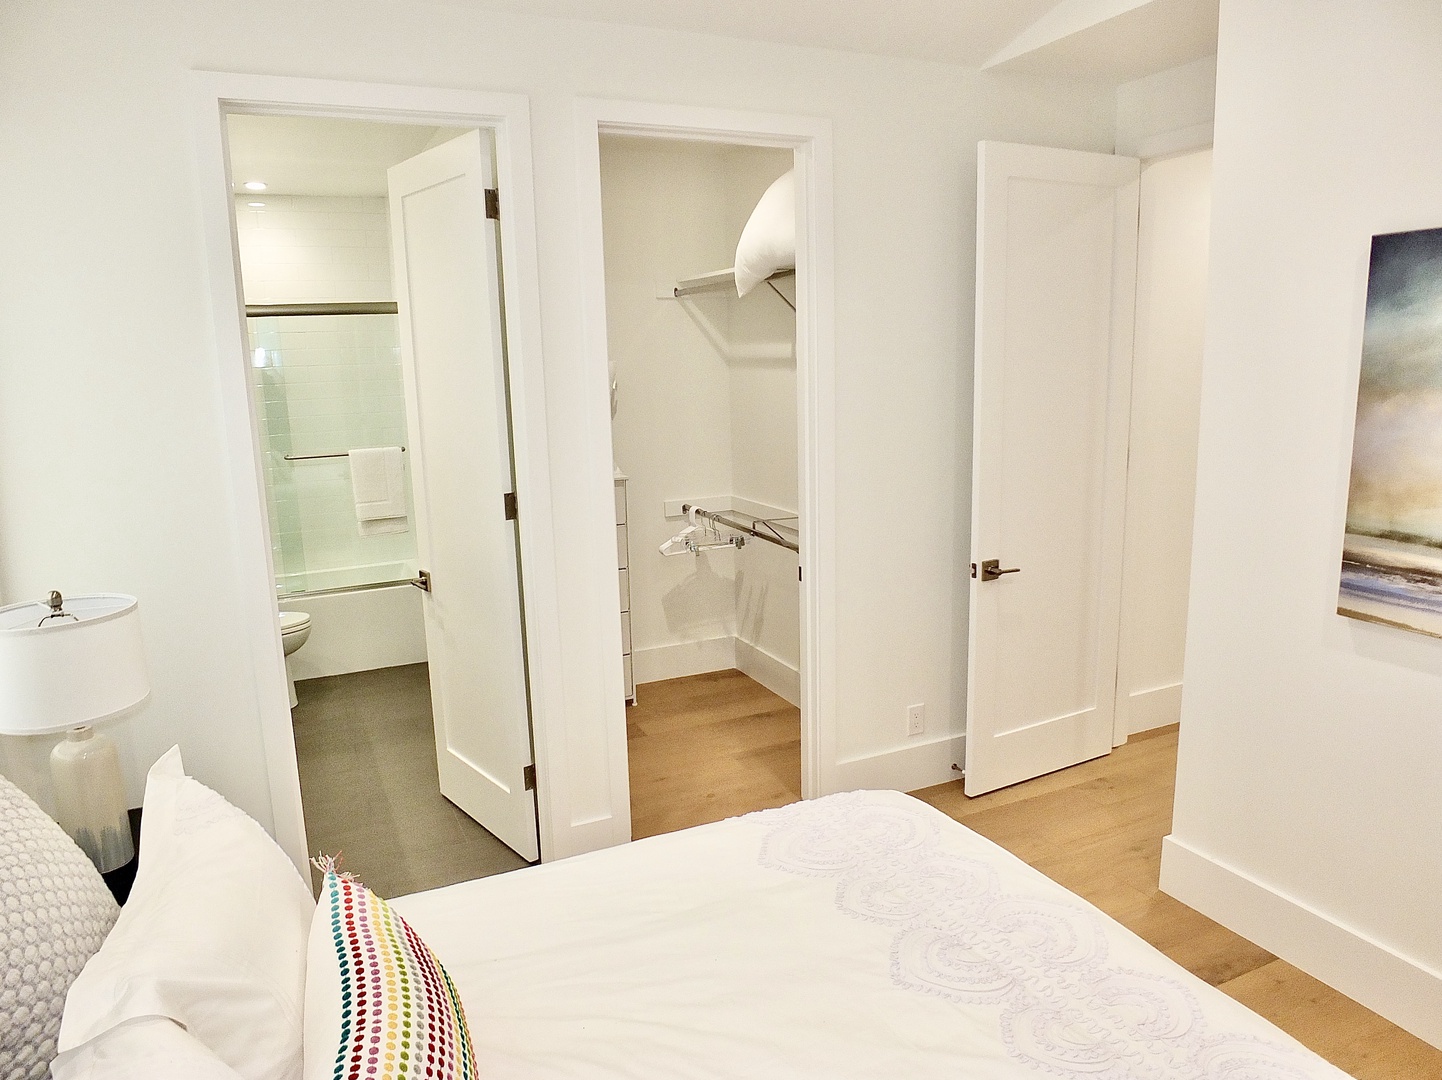 The final 2nd-floor suite offers a plush queen bed & private ensuite